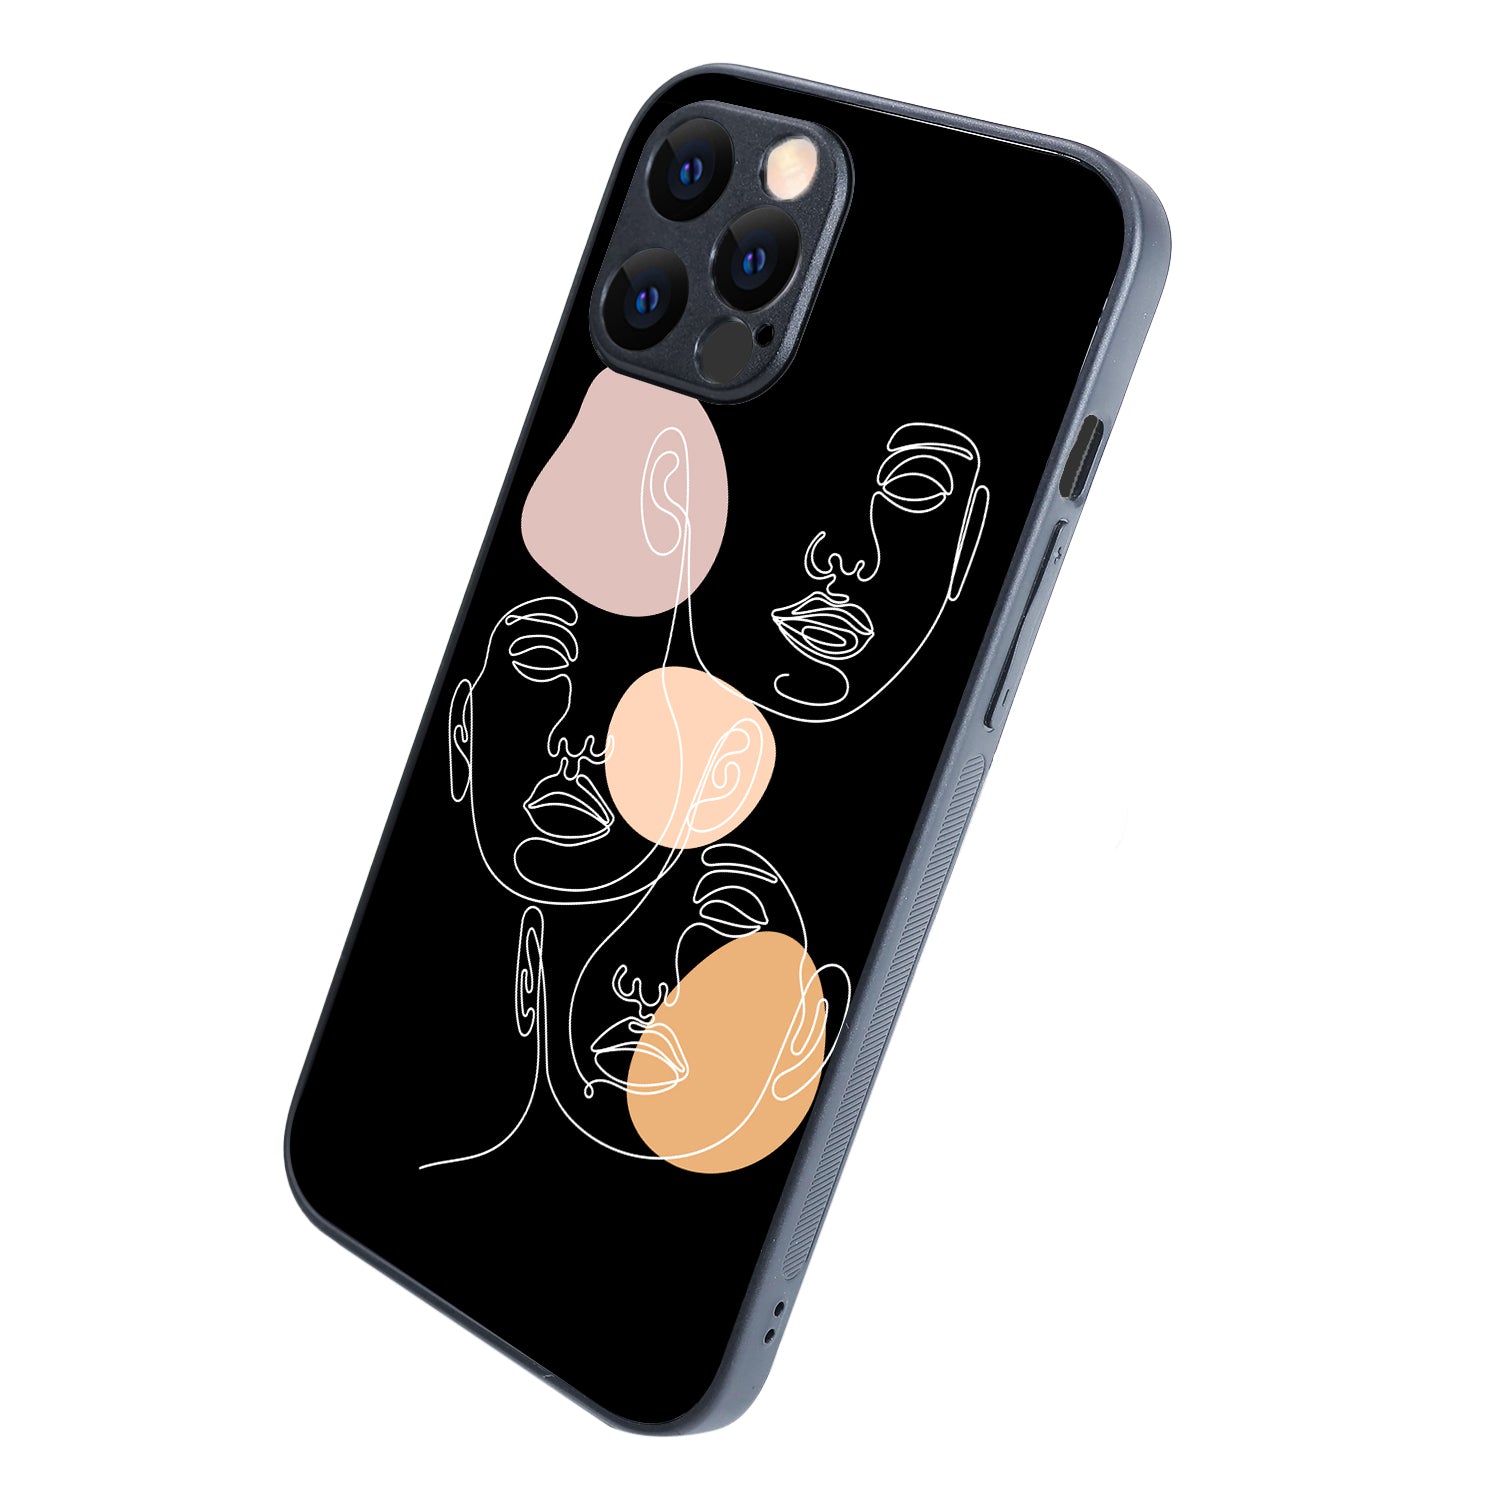 Face Aesthetic Human iPhone 12 Pro Max Case